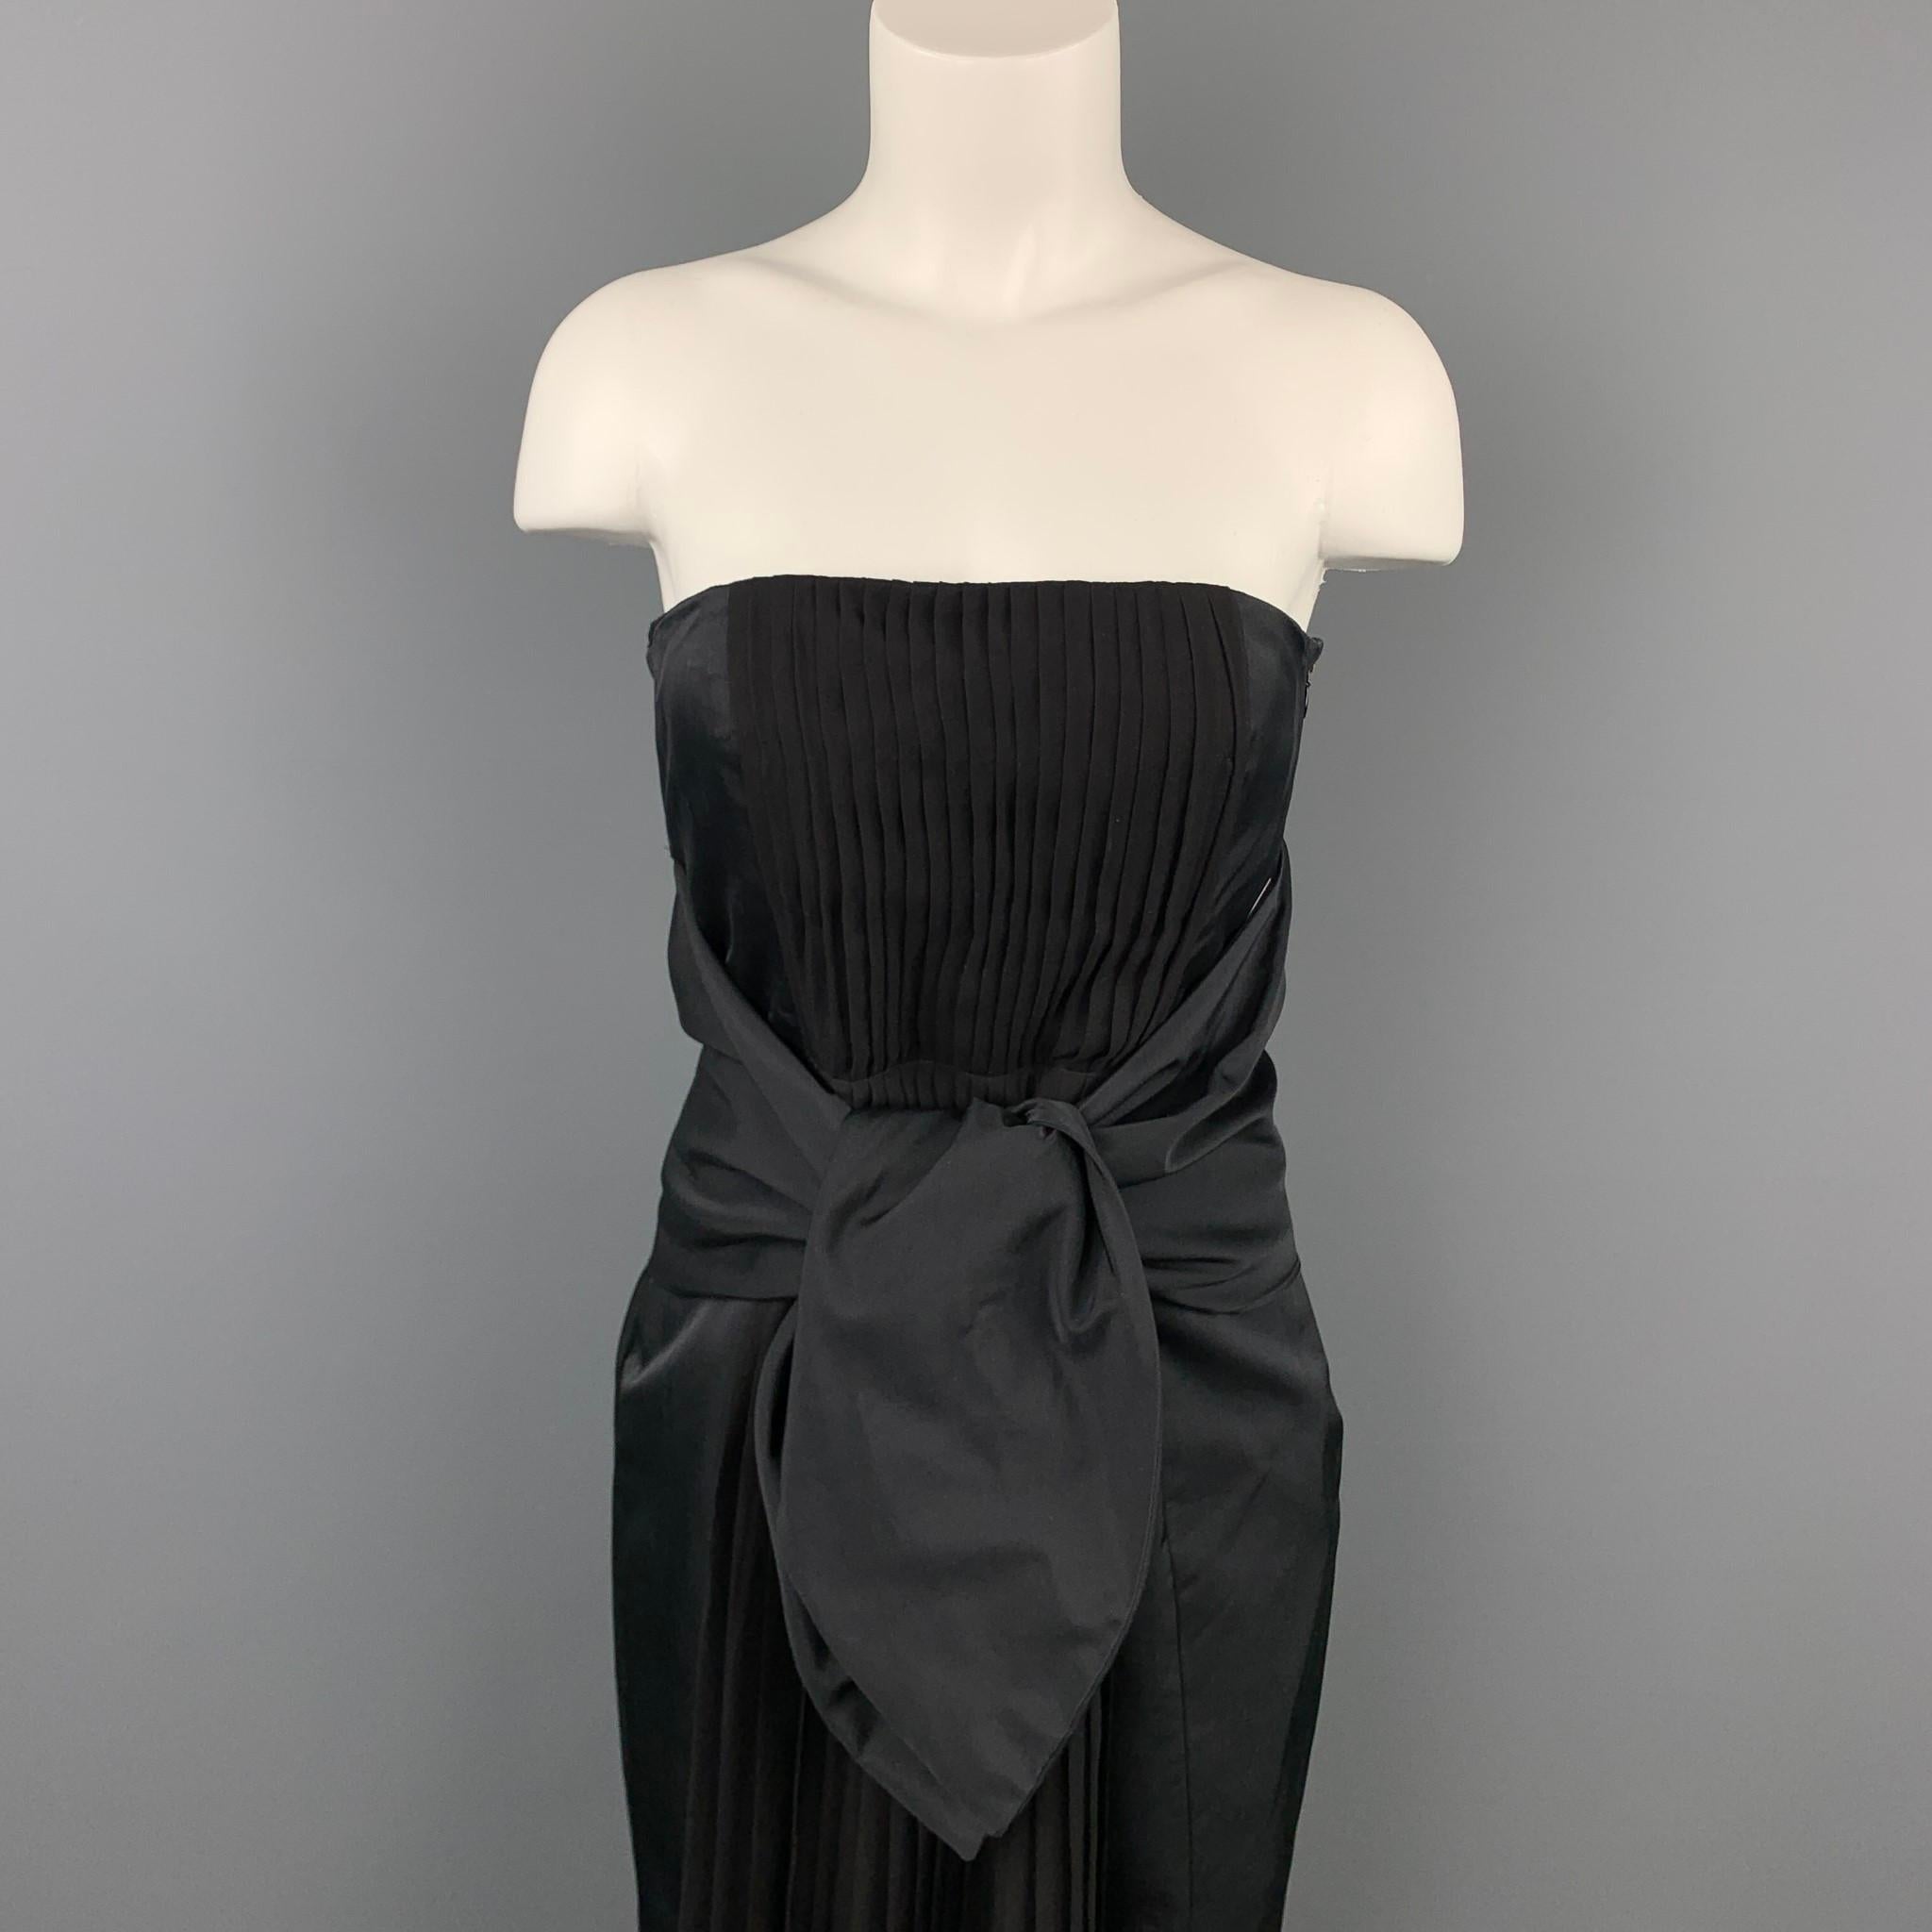 GIAMBATTISTA VALLI strapless dress comes in a black pleated cotton / silk featuring a cocktail style, inner bustier, wide waist tie detail, and a side zip up closure. Made in Italy.

Very Good Pre-Owned Condition.
Marked: 42 /